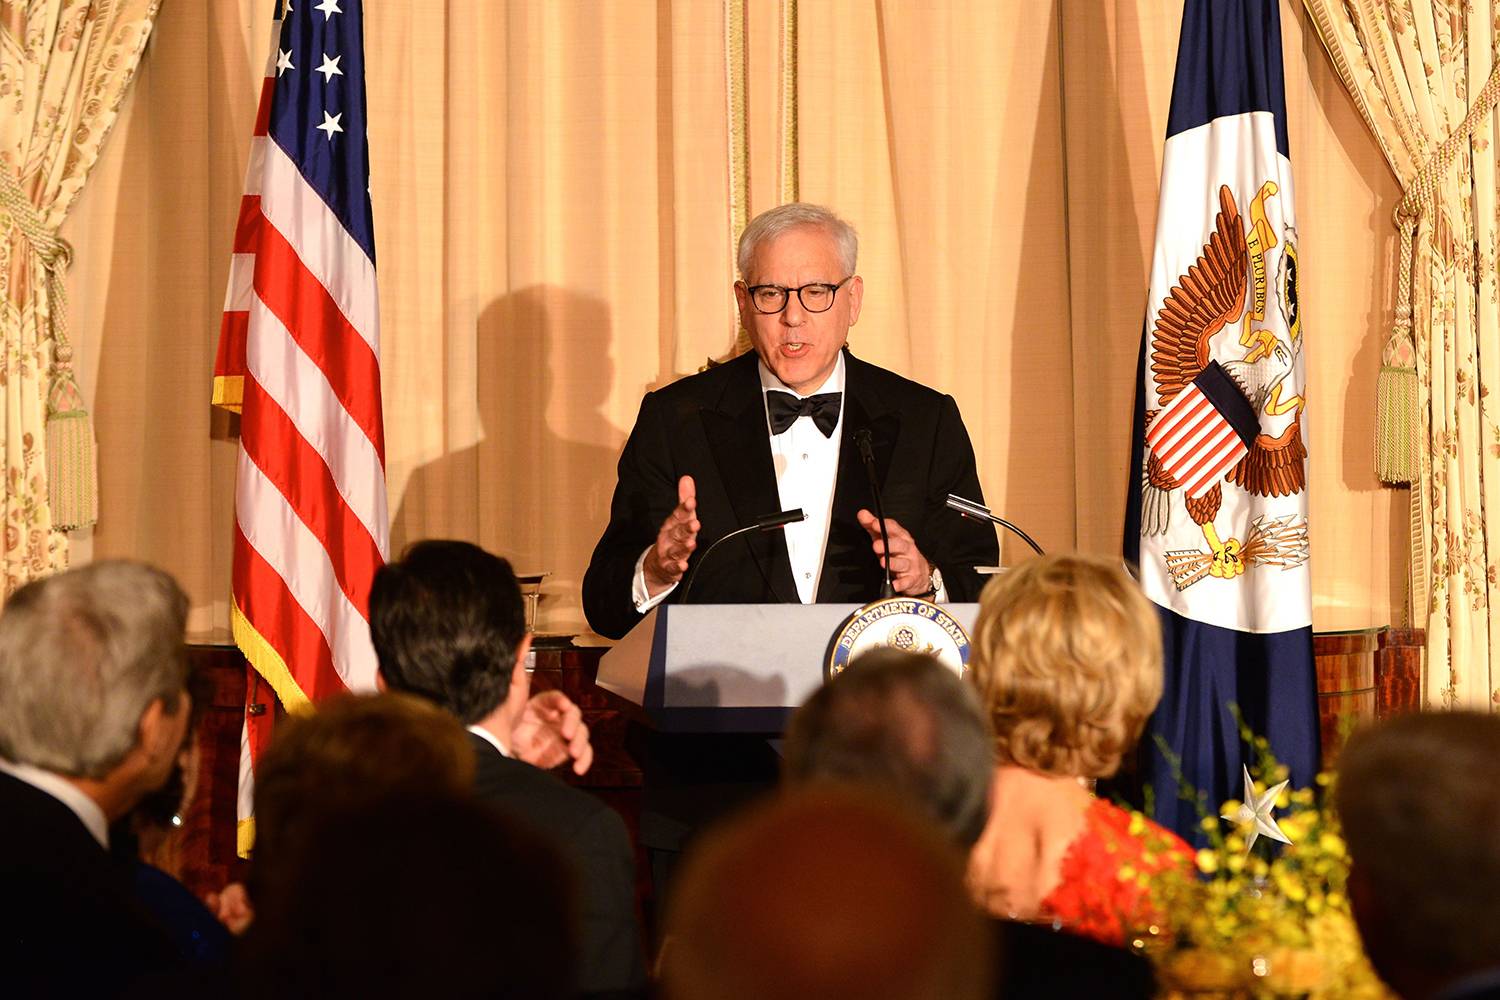 David Rubenstein, by U.S. Department of State from United States [Public domain], via Wikimedia Commons